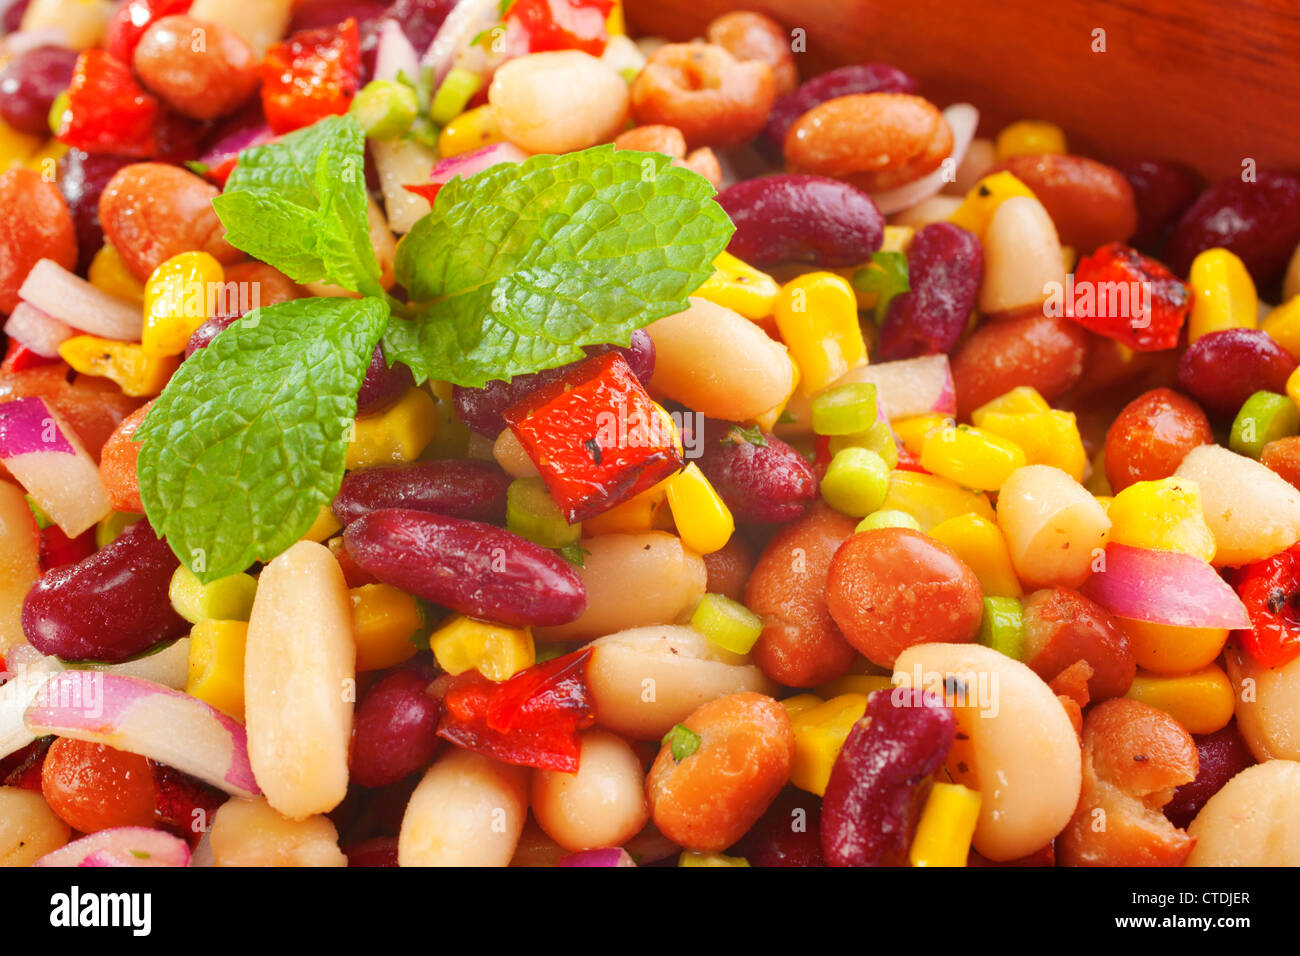 Three bean salad with sweetcorn, roasted red peppers and red onion in a vinaigrette dresing. Stock Photo